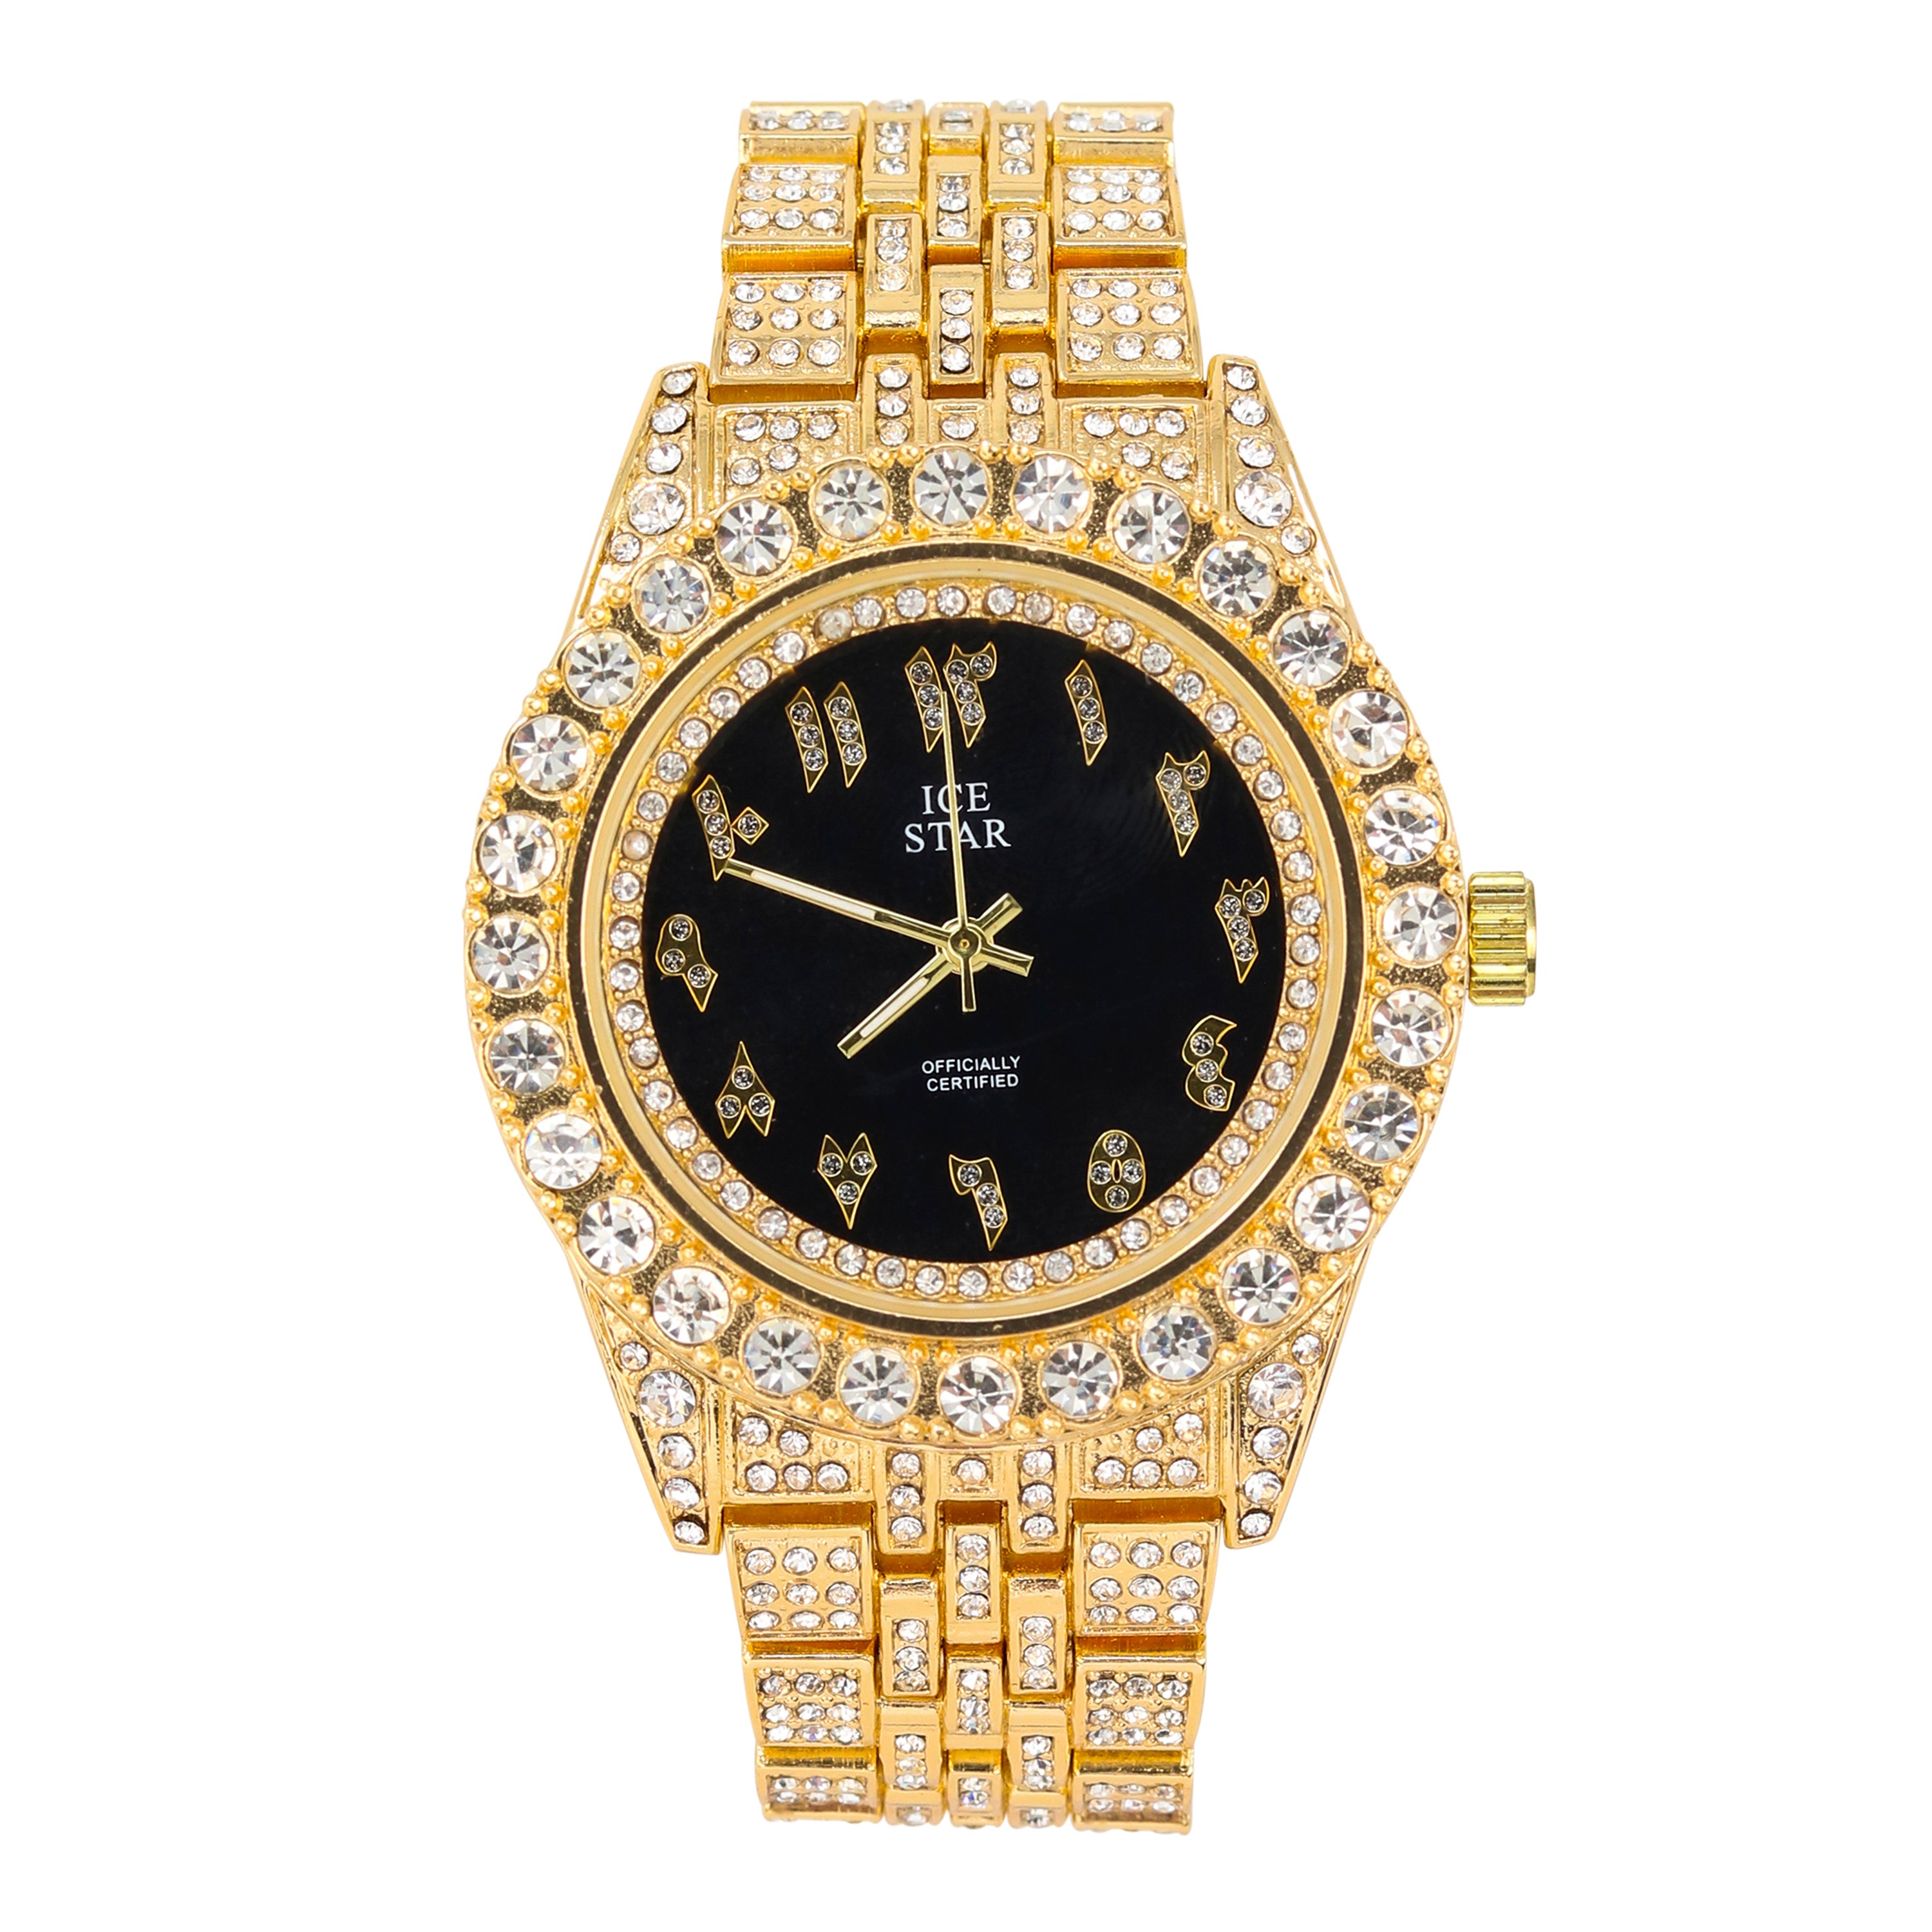 Men's Round Iced Out Watch 44mm Gold - Arab Dial